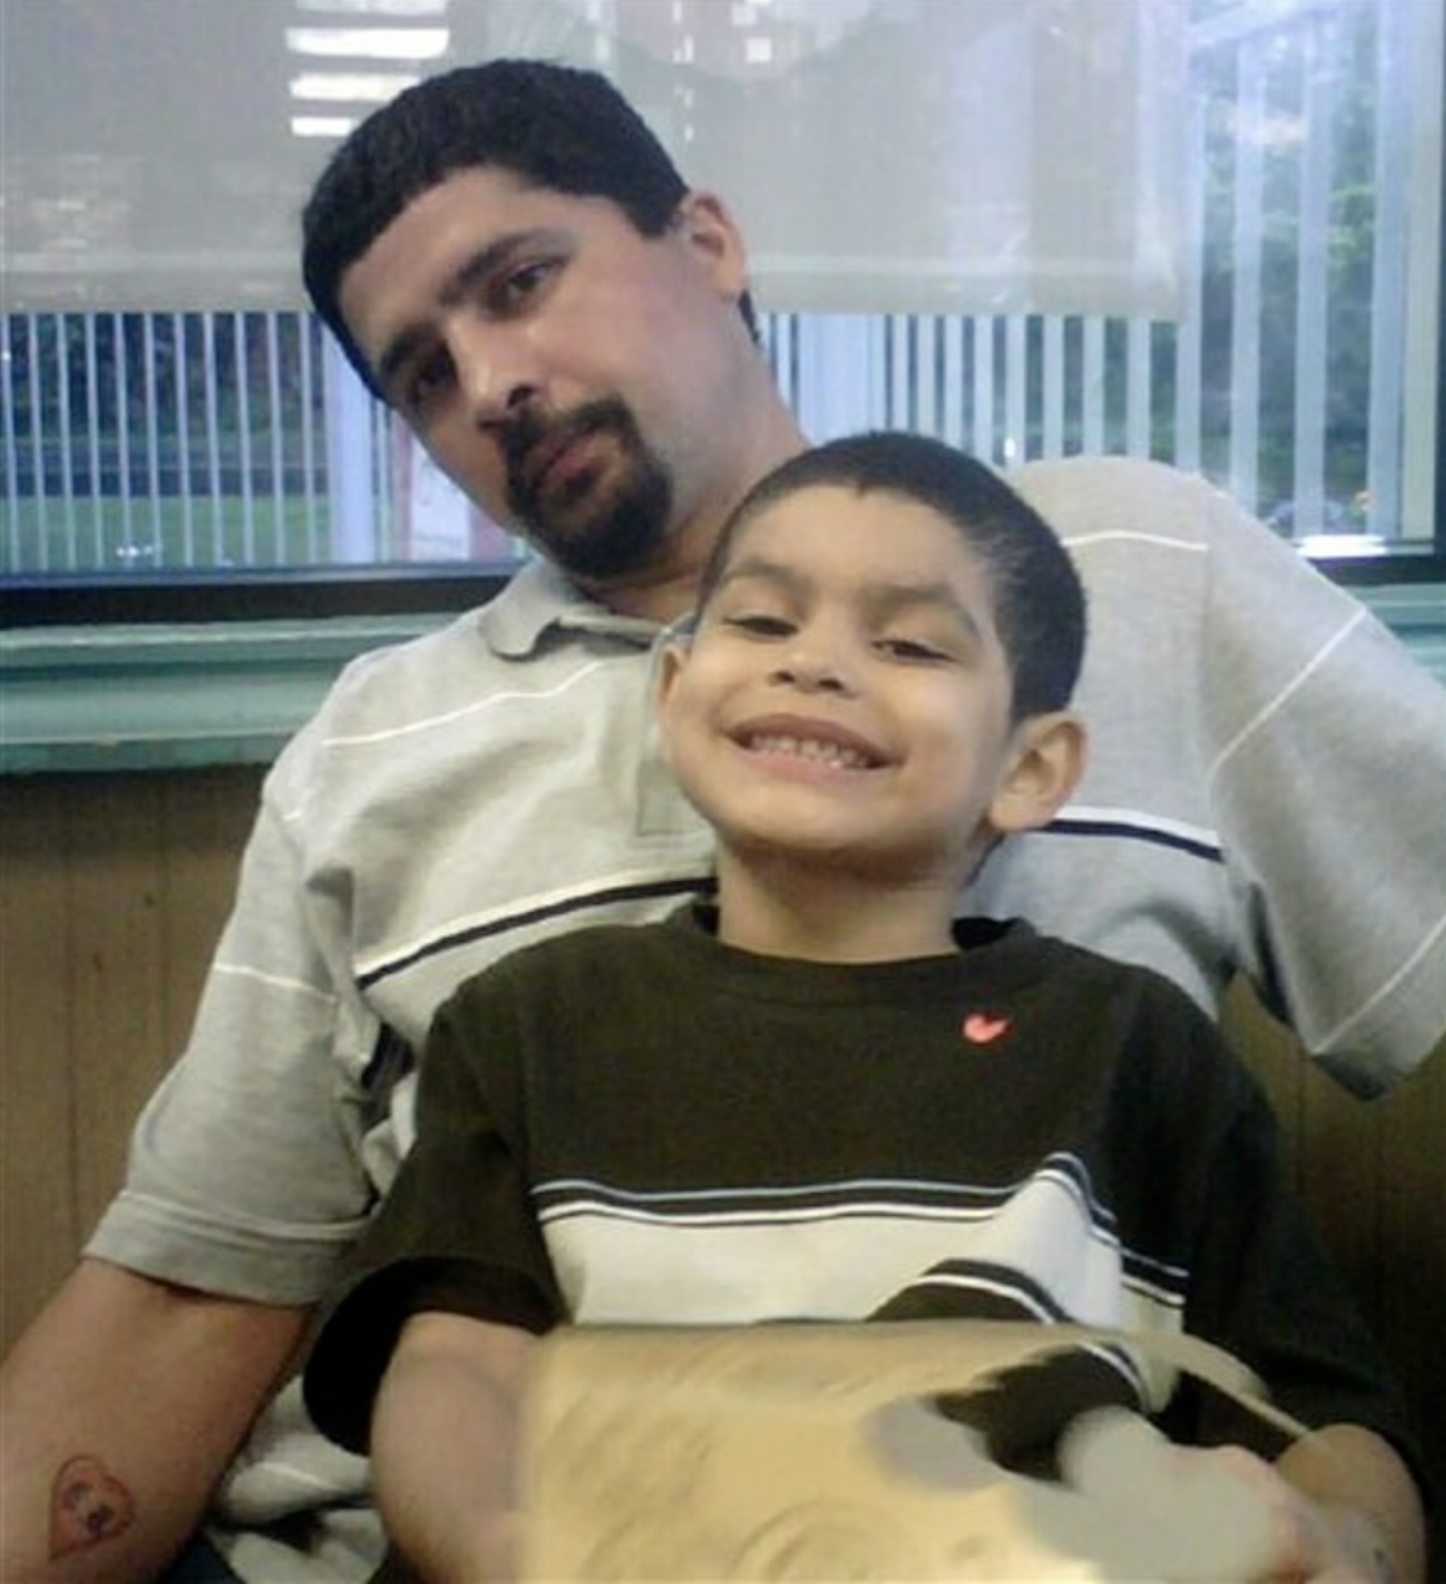 Giovanni Colon Gonzalez was spending the weekend with his father, Ernesto Gonzalez, when he went missing